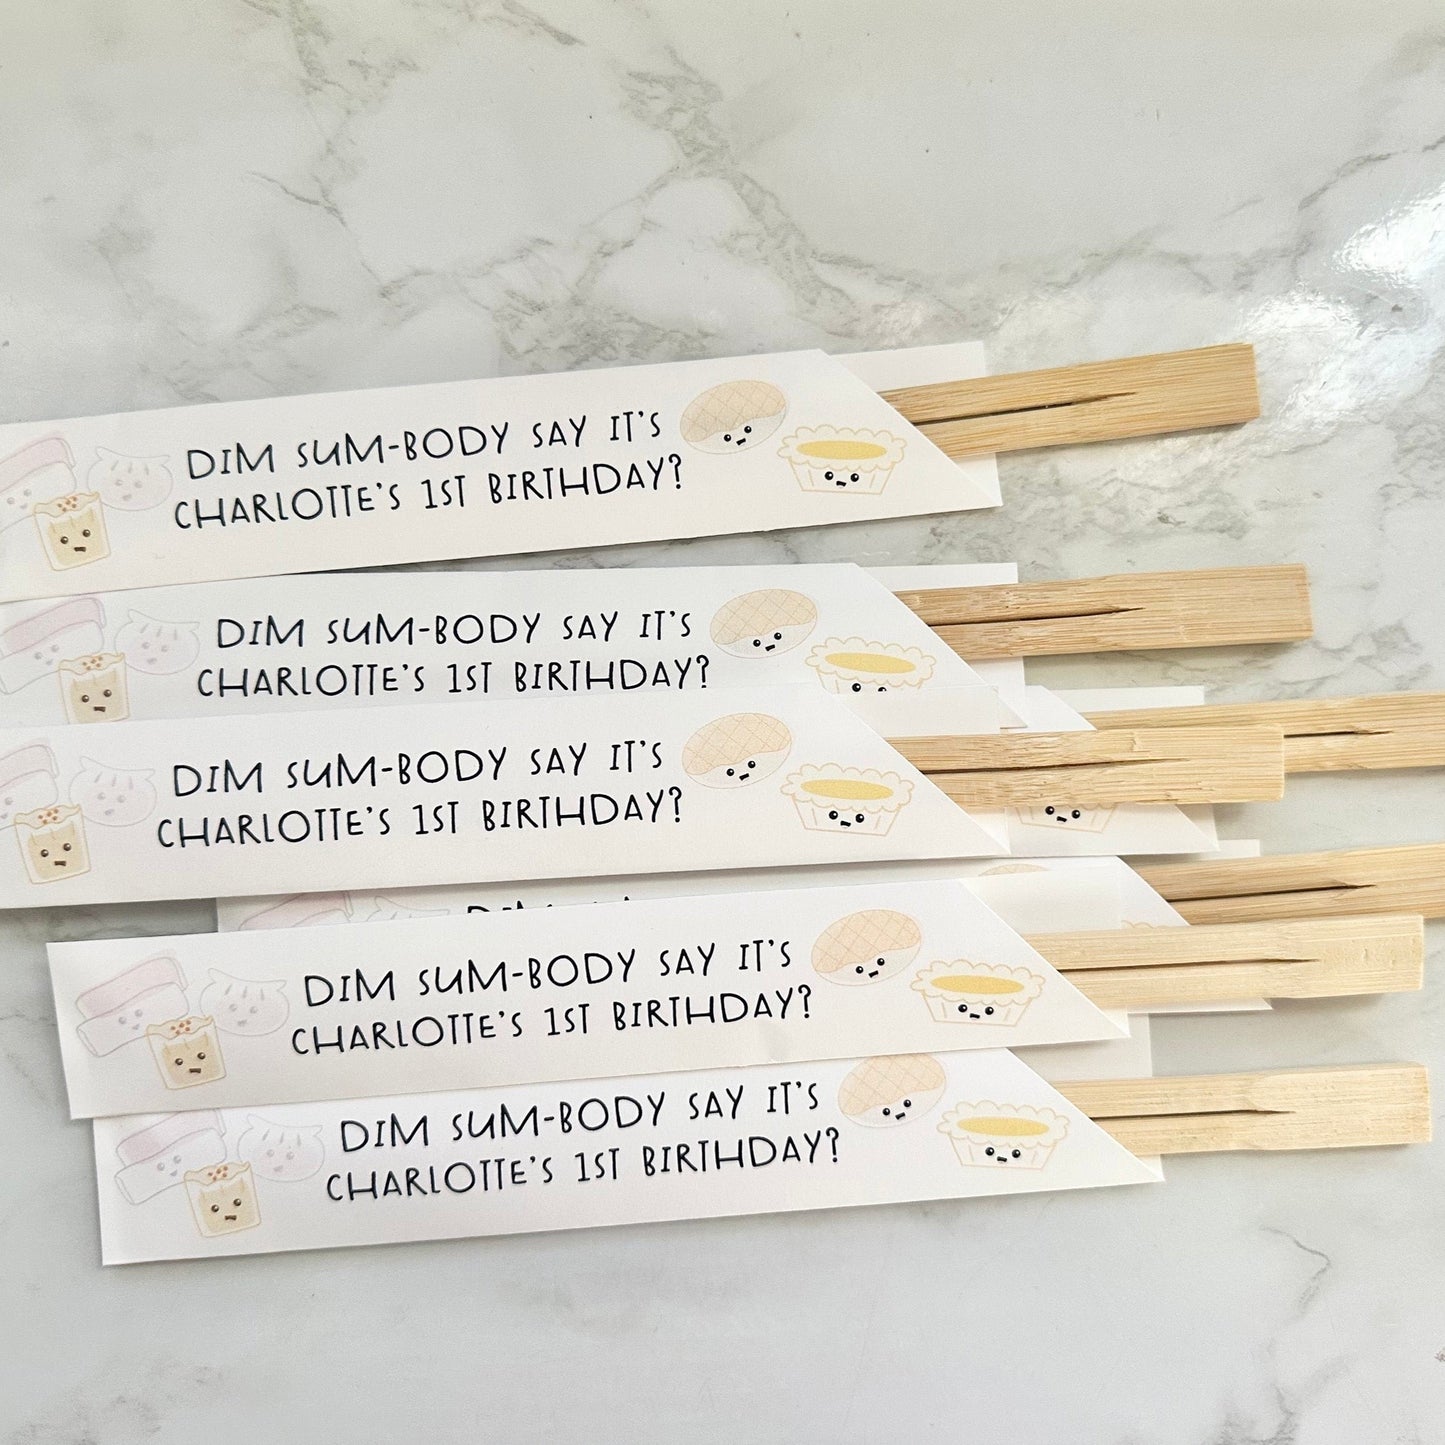 Personalized Chopstick Sleeves for a Dim Sum Party